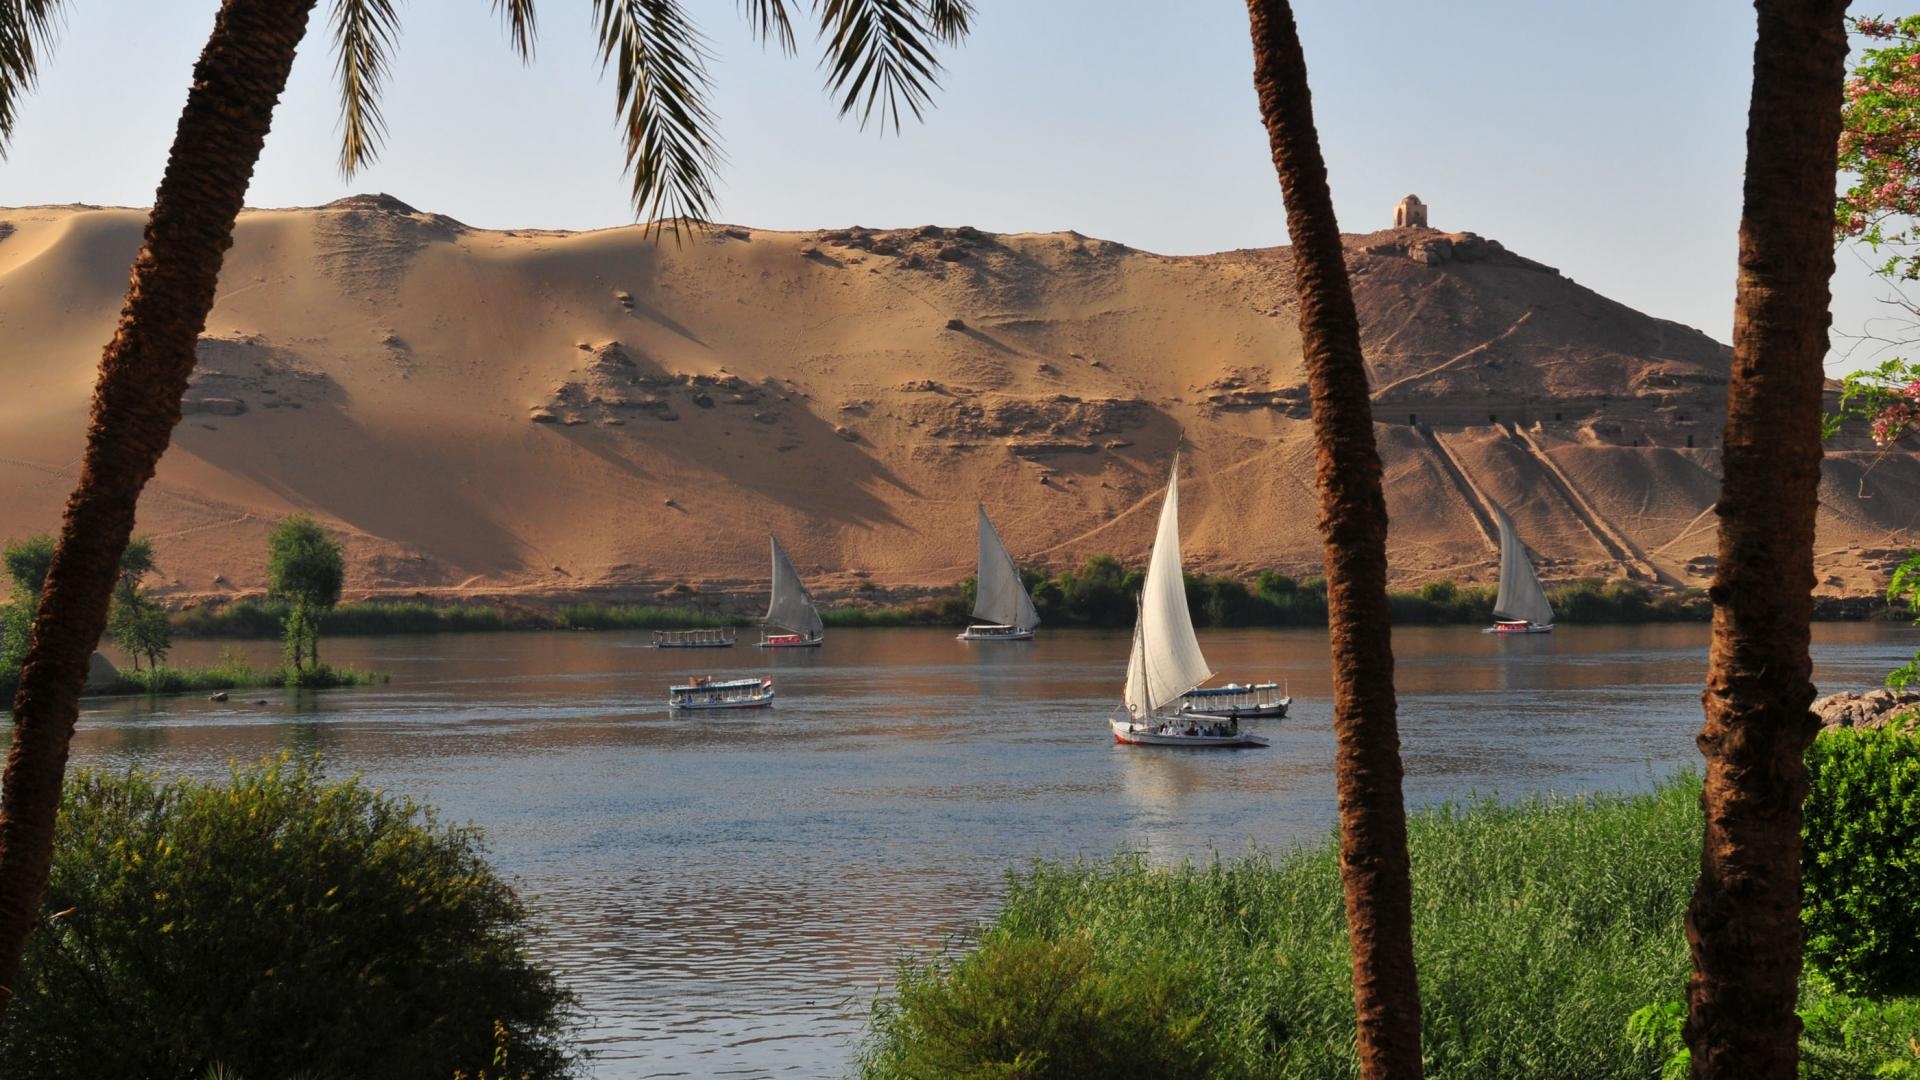 The Nile River, Breathtaking landscapes, Cultural significance, Timeless beauty, 1920x1080 Full HD Desktop